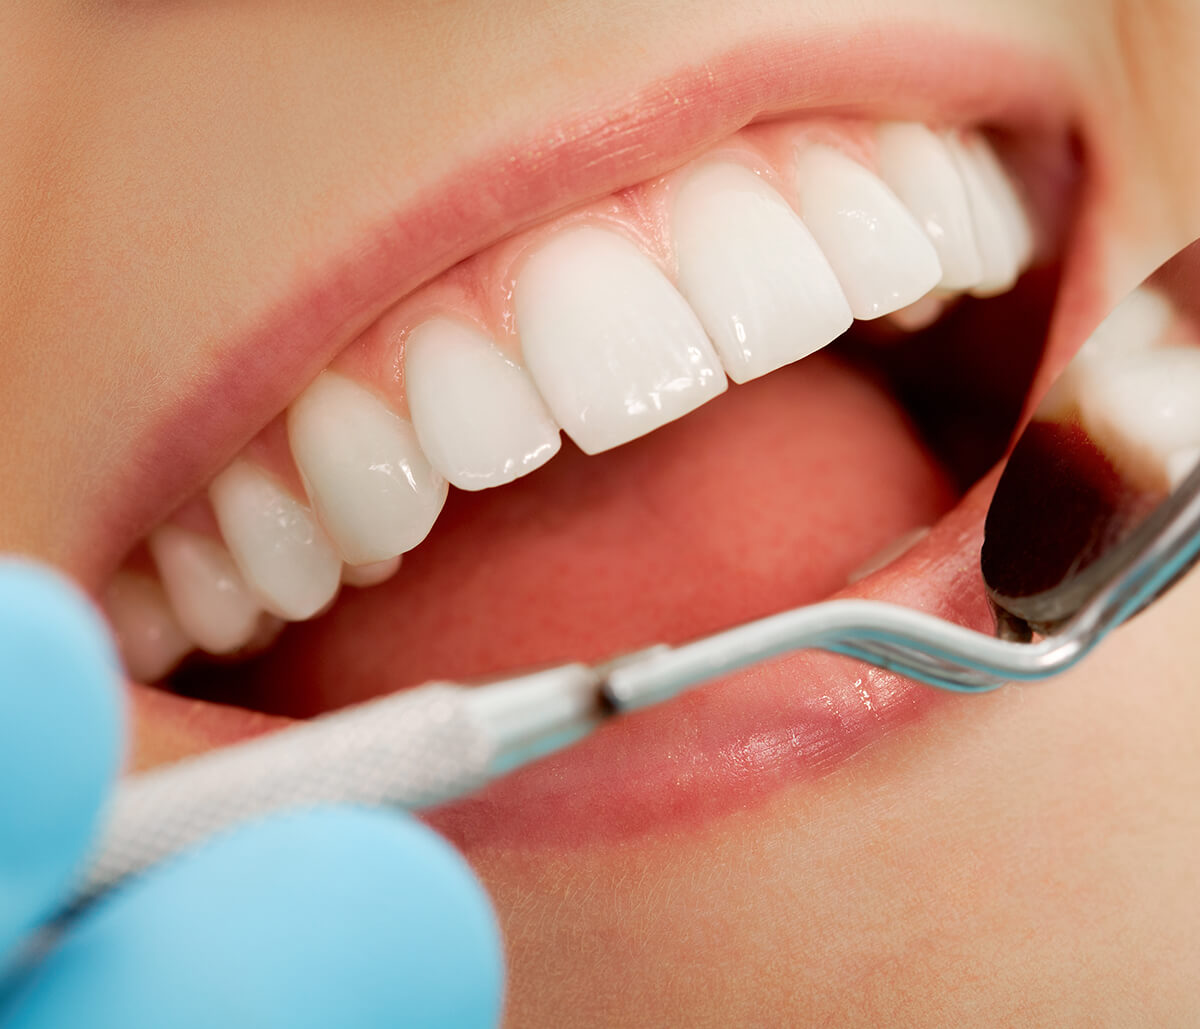 In Kirkland, WA Area, Dentist Offers Professional Teeth Whitening Services